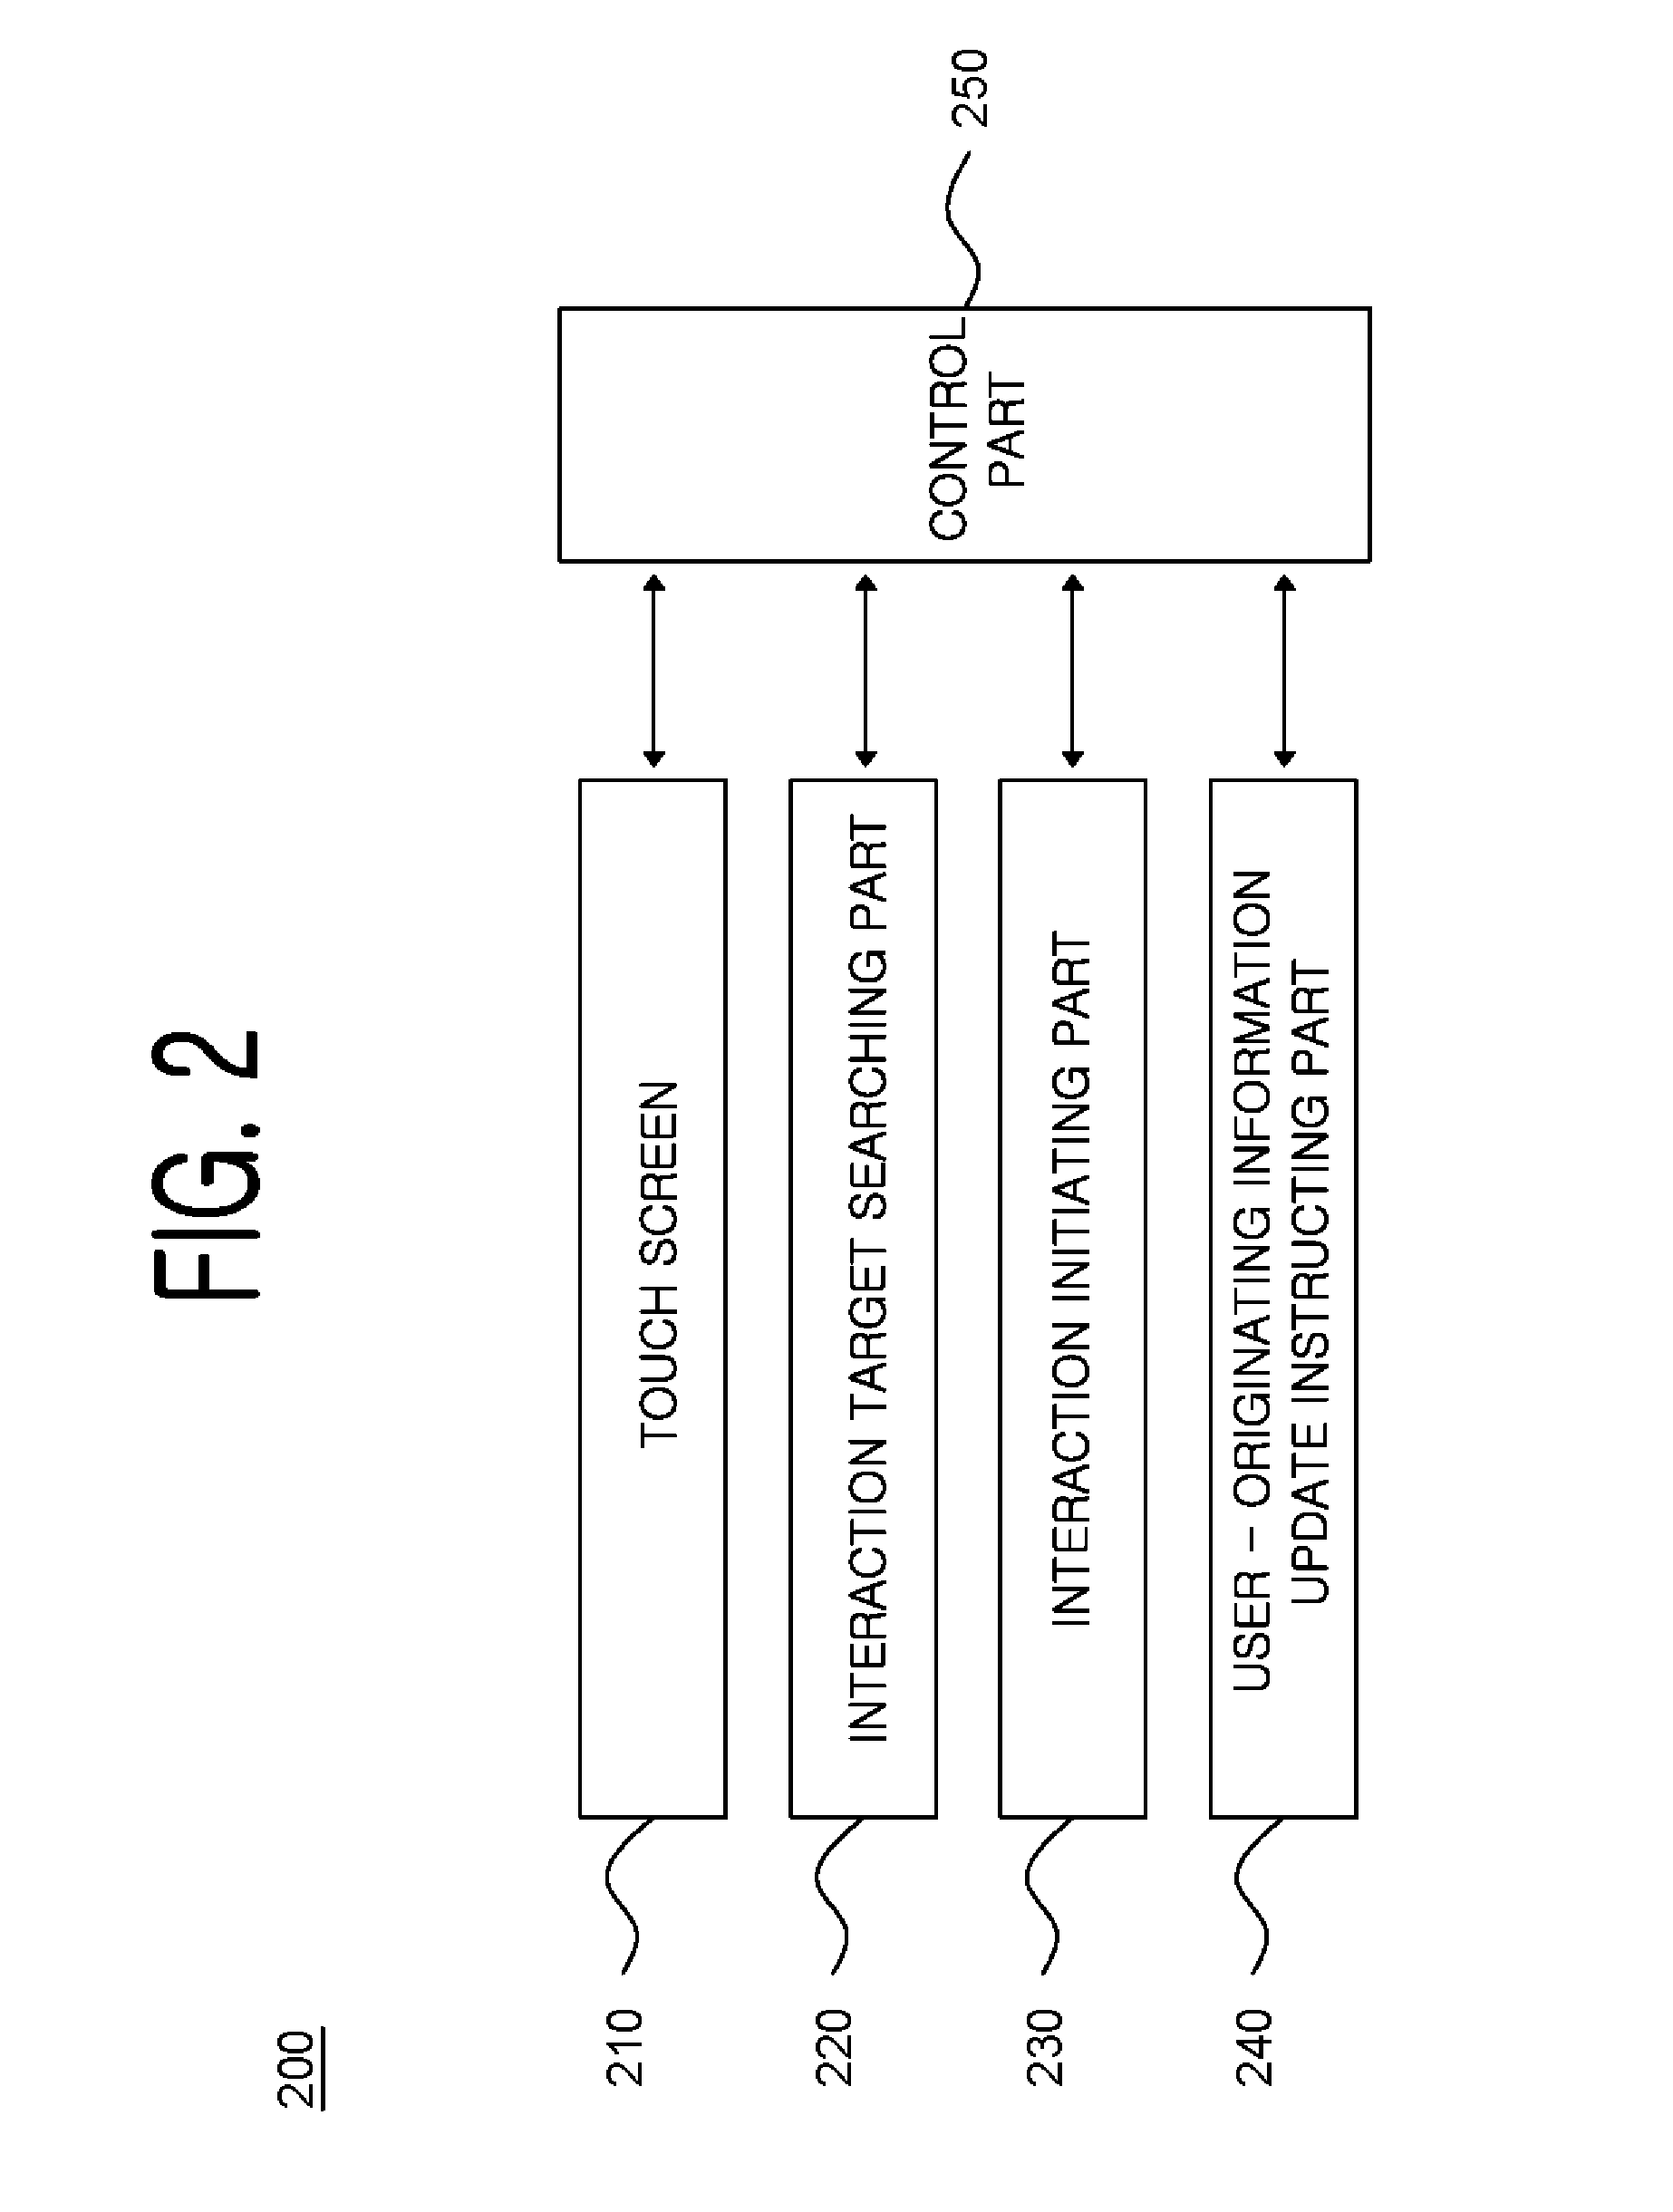 Method for changing user-originating information through interaction with other user